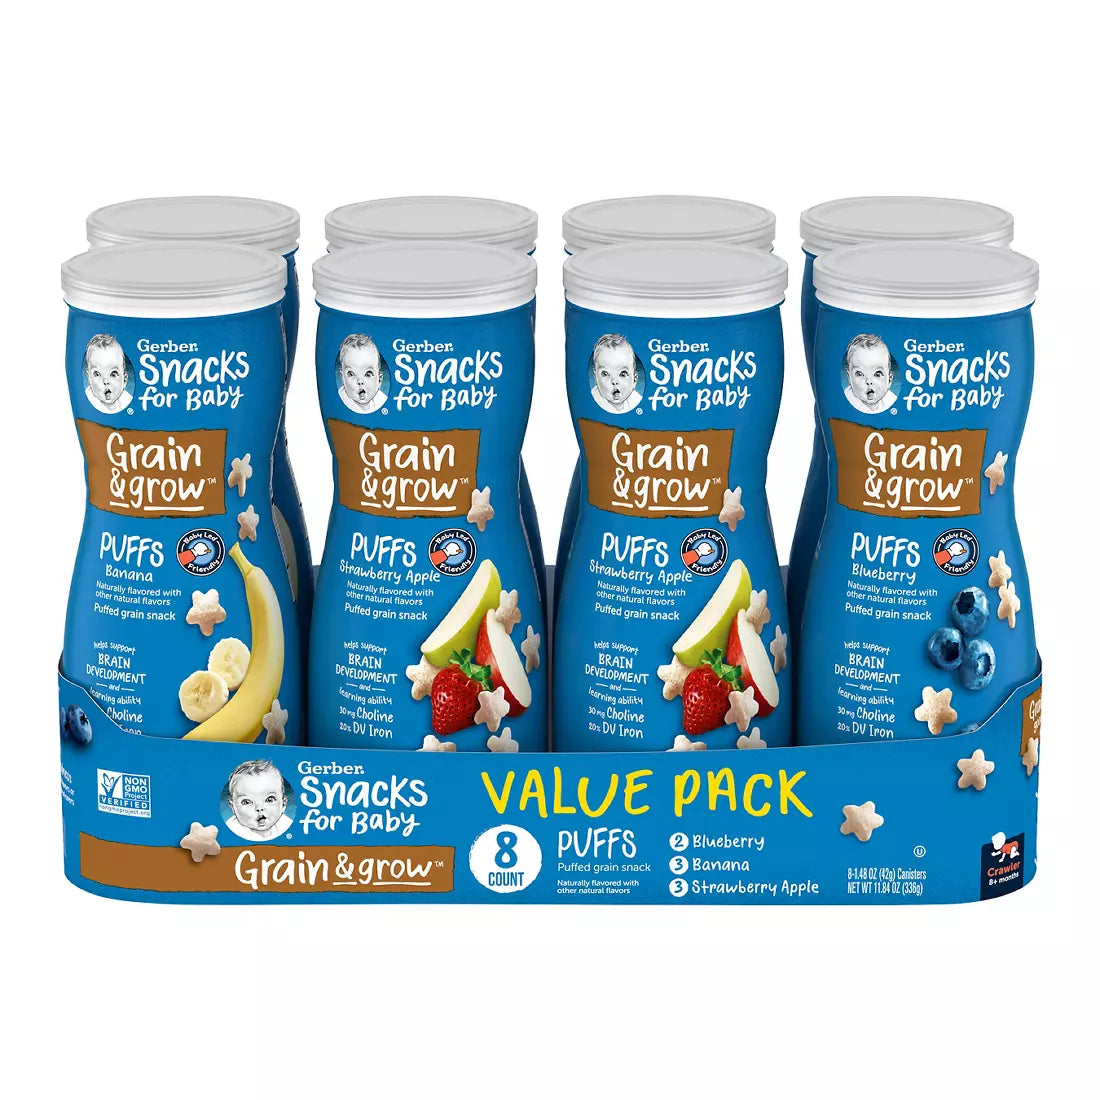 Gerber Baby Snacks For Baby Puffs Variety Pack, 8 pk./1.48 oz.